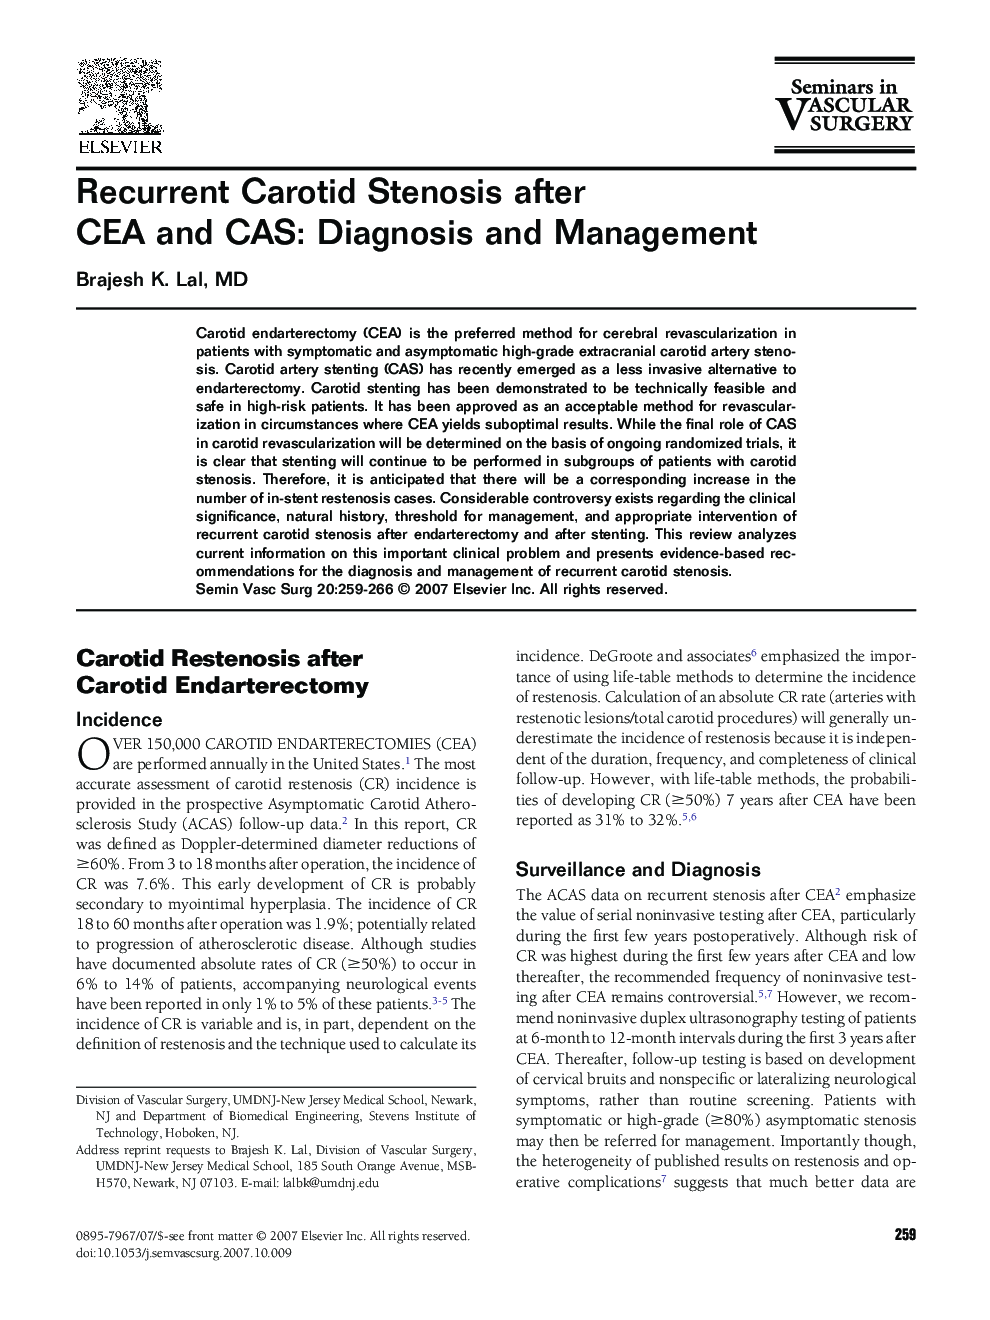 Recurrent Carotid Stenosis after CEA and CAS: Diagnosis and Management